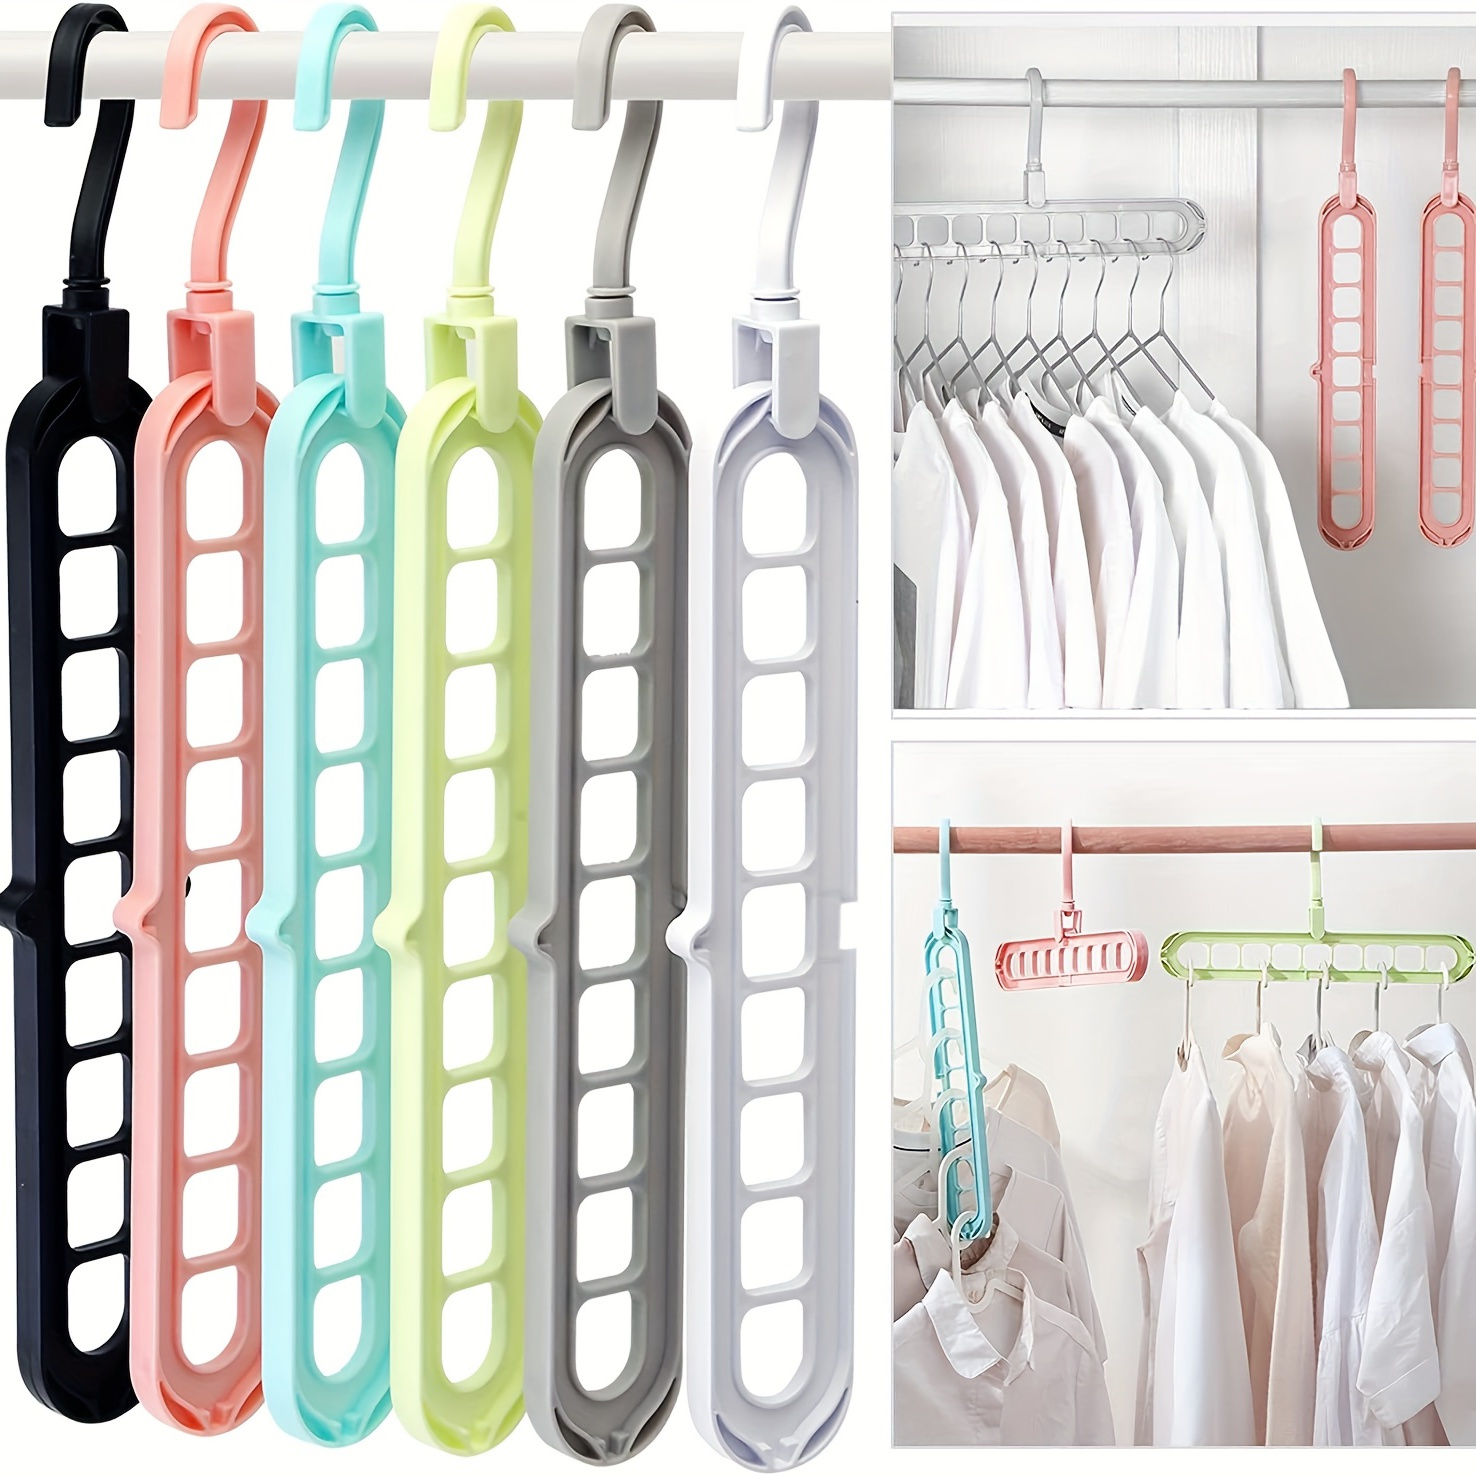 

5pcs Multifunctional Closet Organizer With 9 Hole Coat Hanger For College Dorm Room And Bedroom Wardrobe - Space Saving Hanging Shelves System For Girls